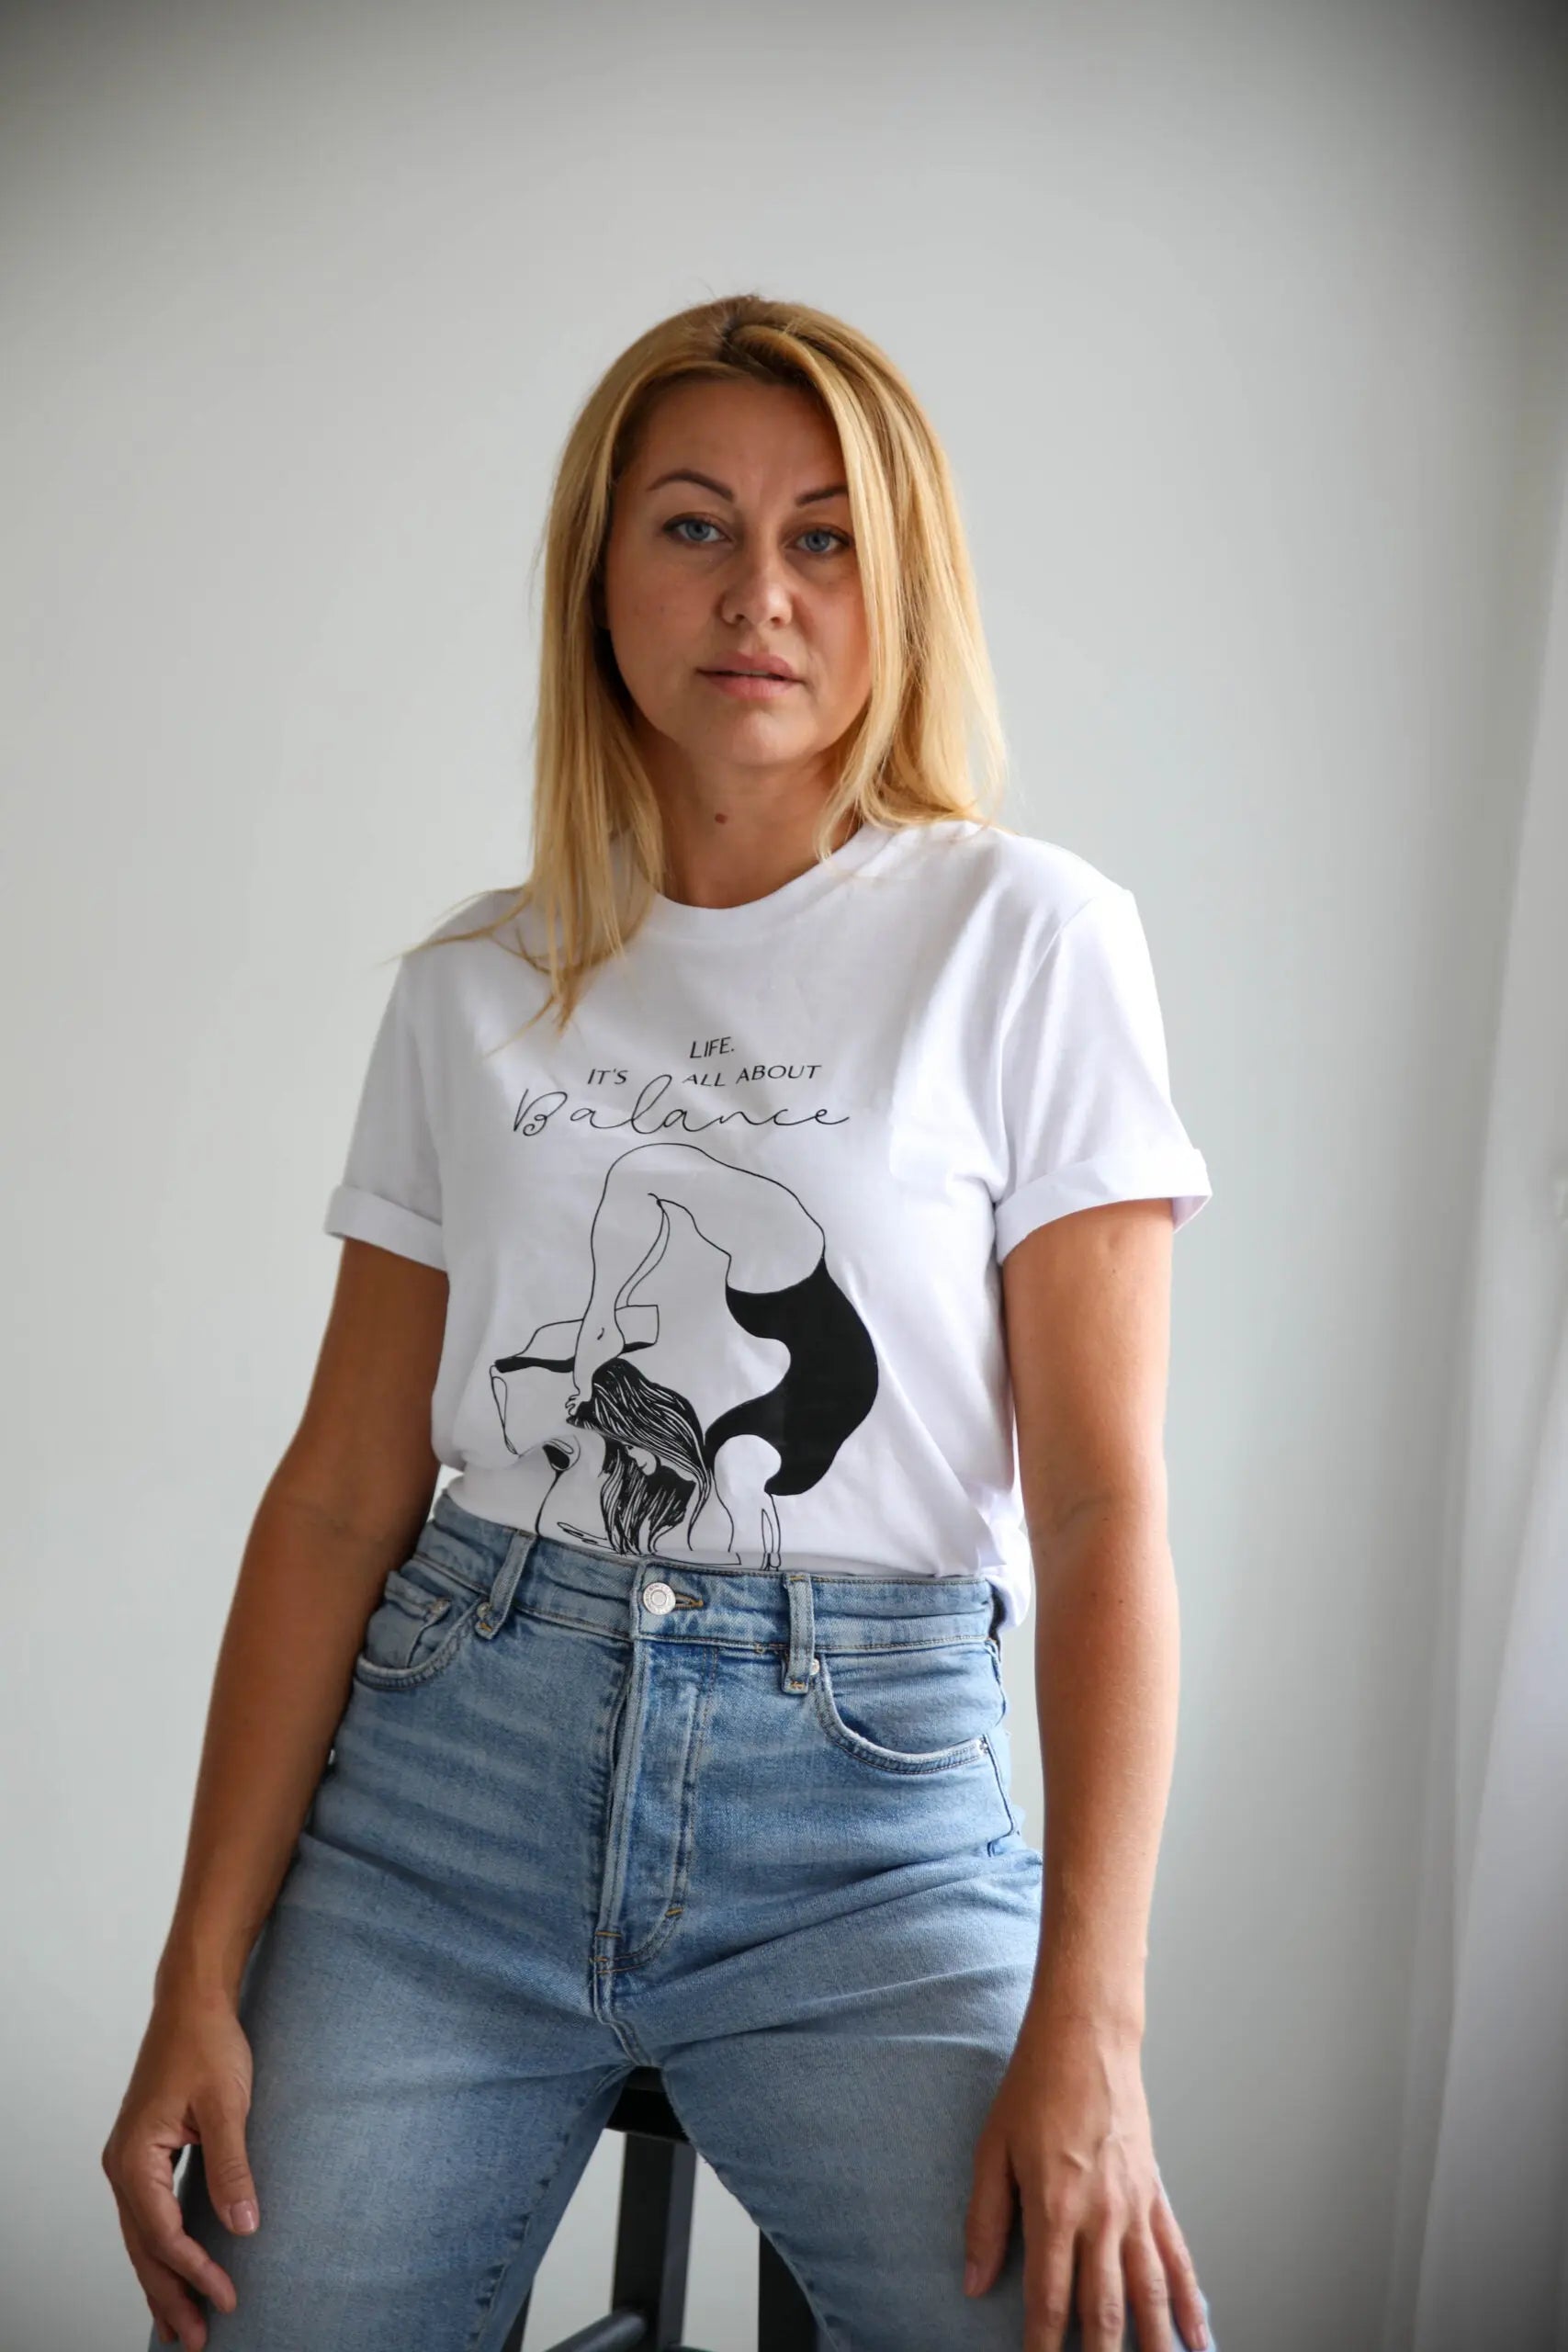 A woman in an oversized white t-shirt with a graphic print 'Life. It's all about balance'. Product emphasizes organic cotton, oversized fit, and washing instructions.